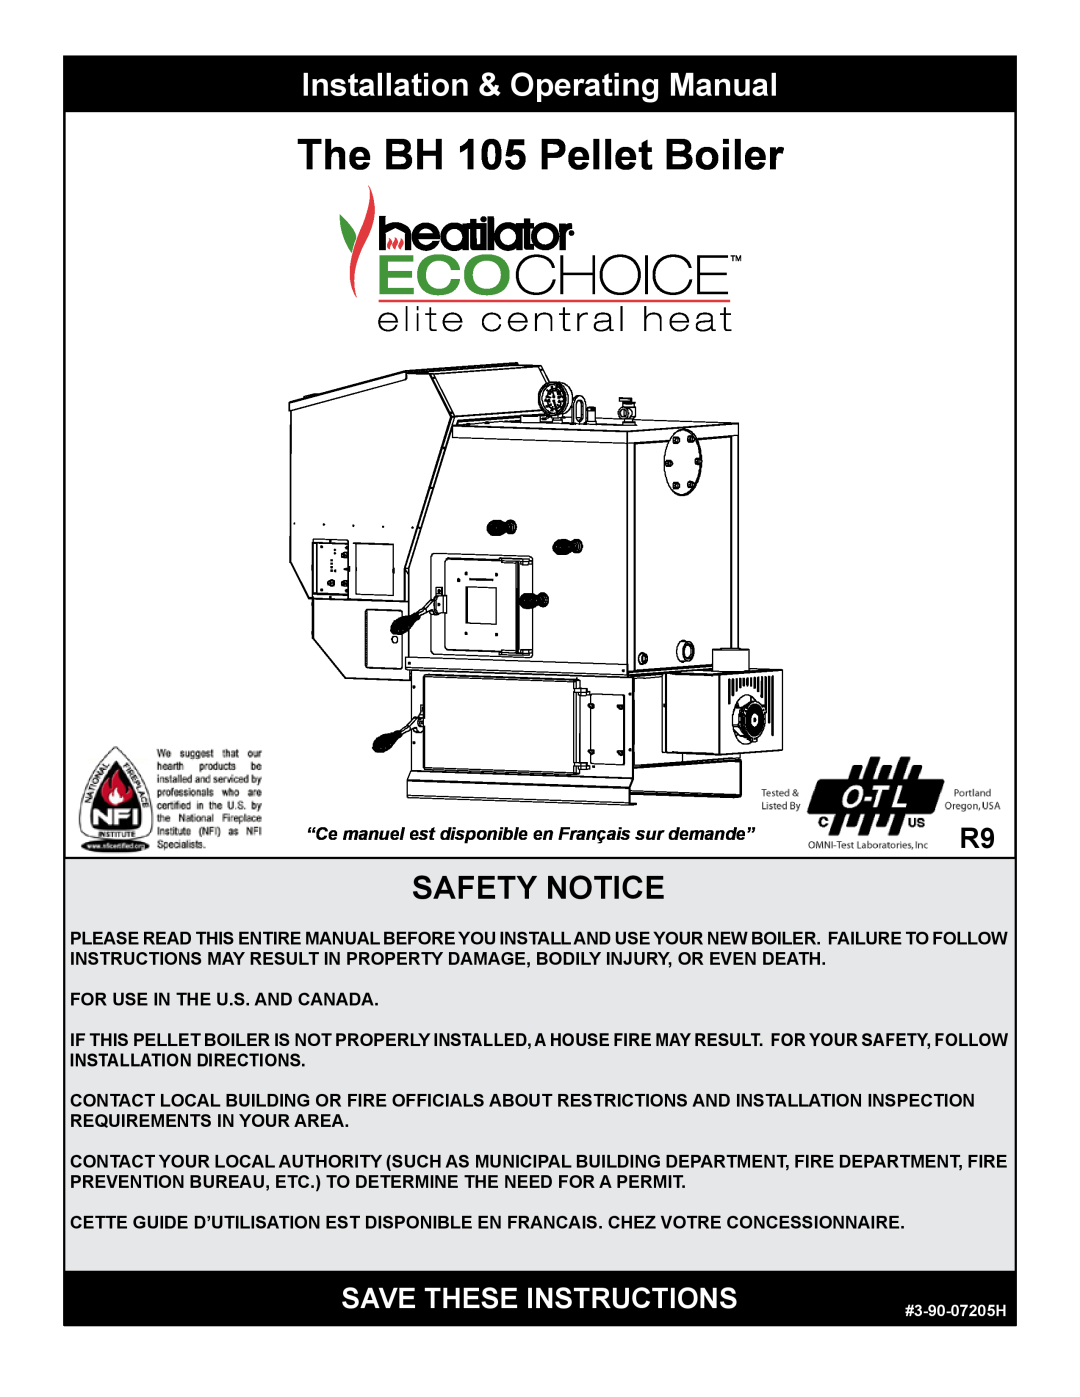 Hearth and Home Technologies manual Installation & Operating Manual, Safety Notice, The BH 105 Pellet Boiler 